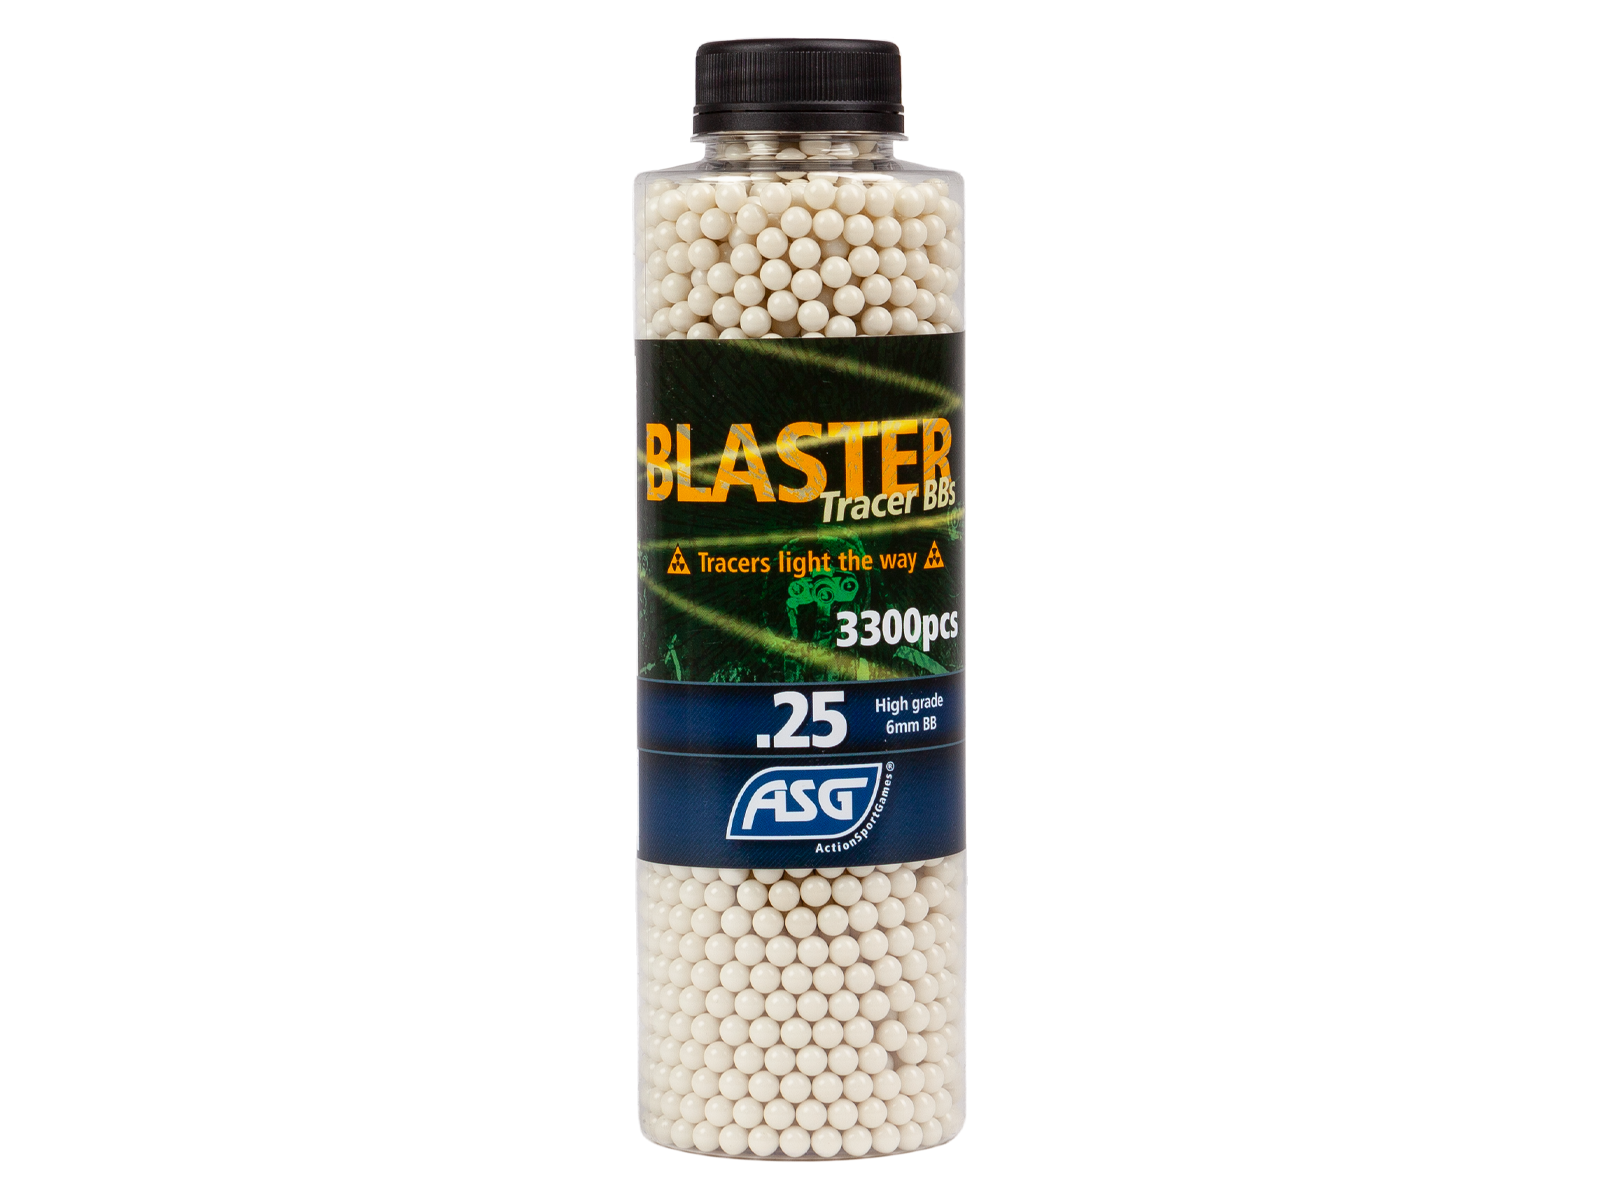 ASG Blaster .25g Tracer BBs – Green 3300pcs | Action Sport Games